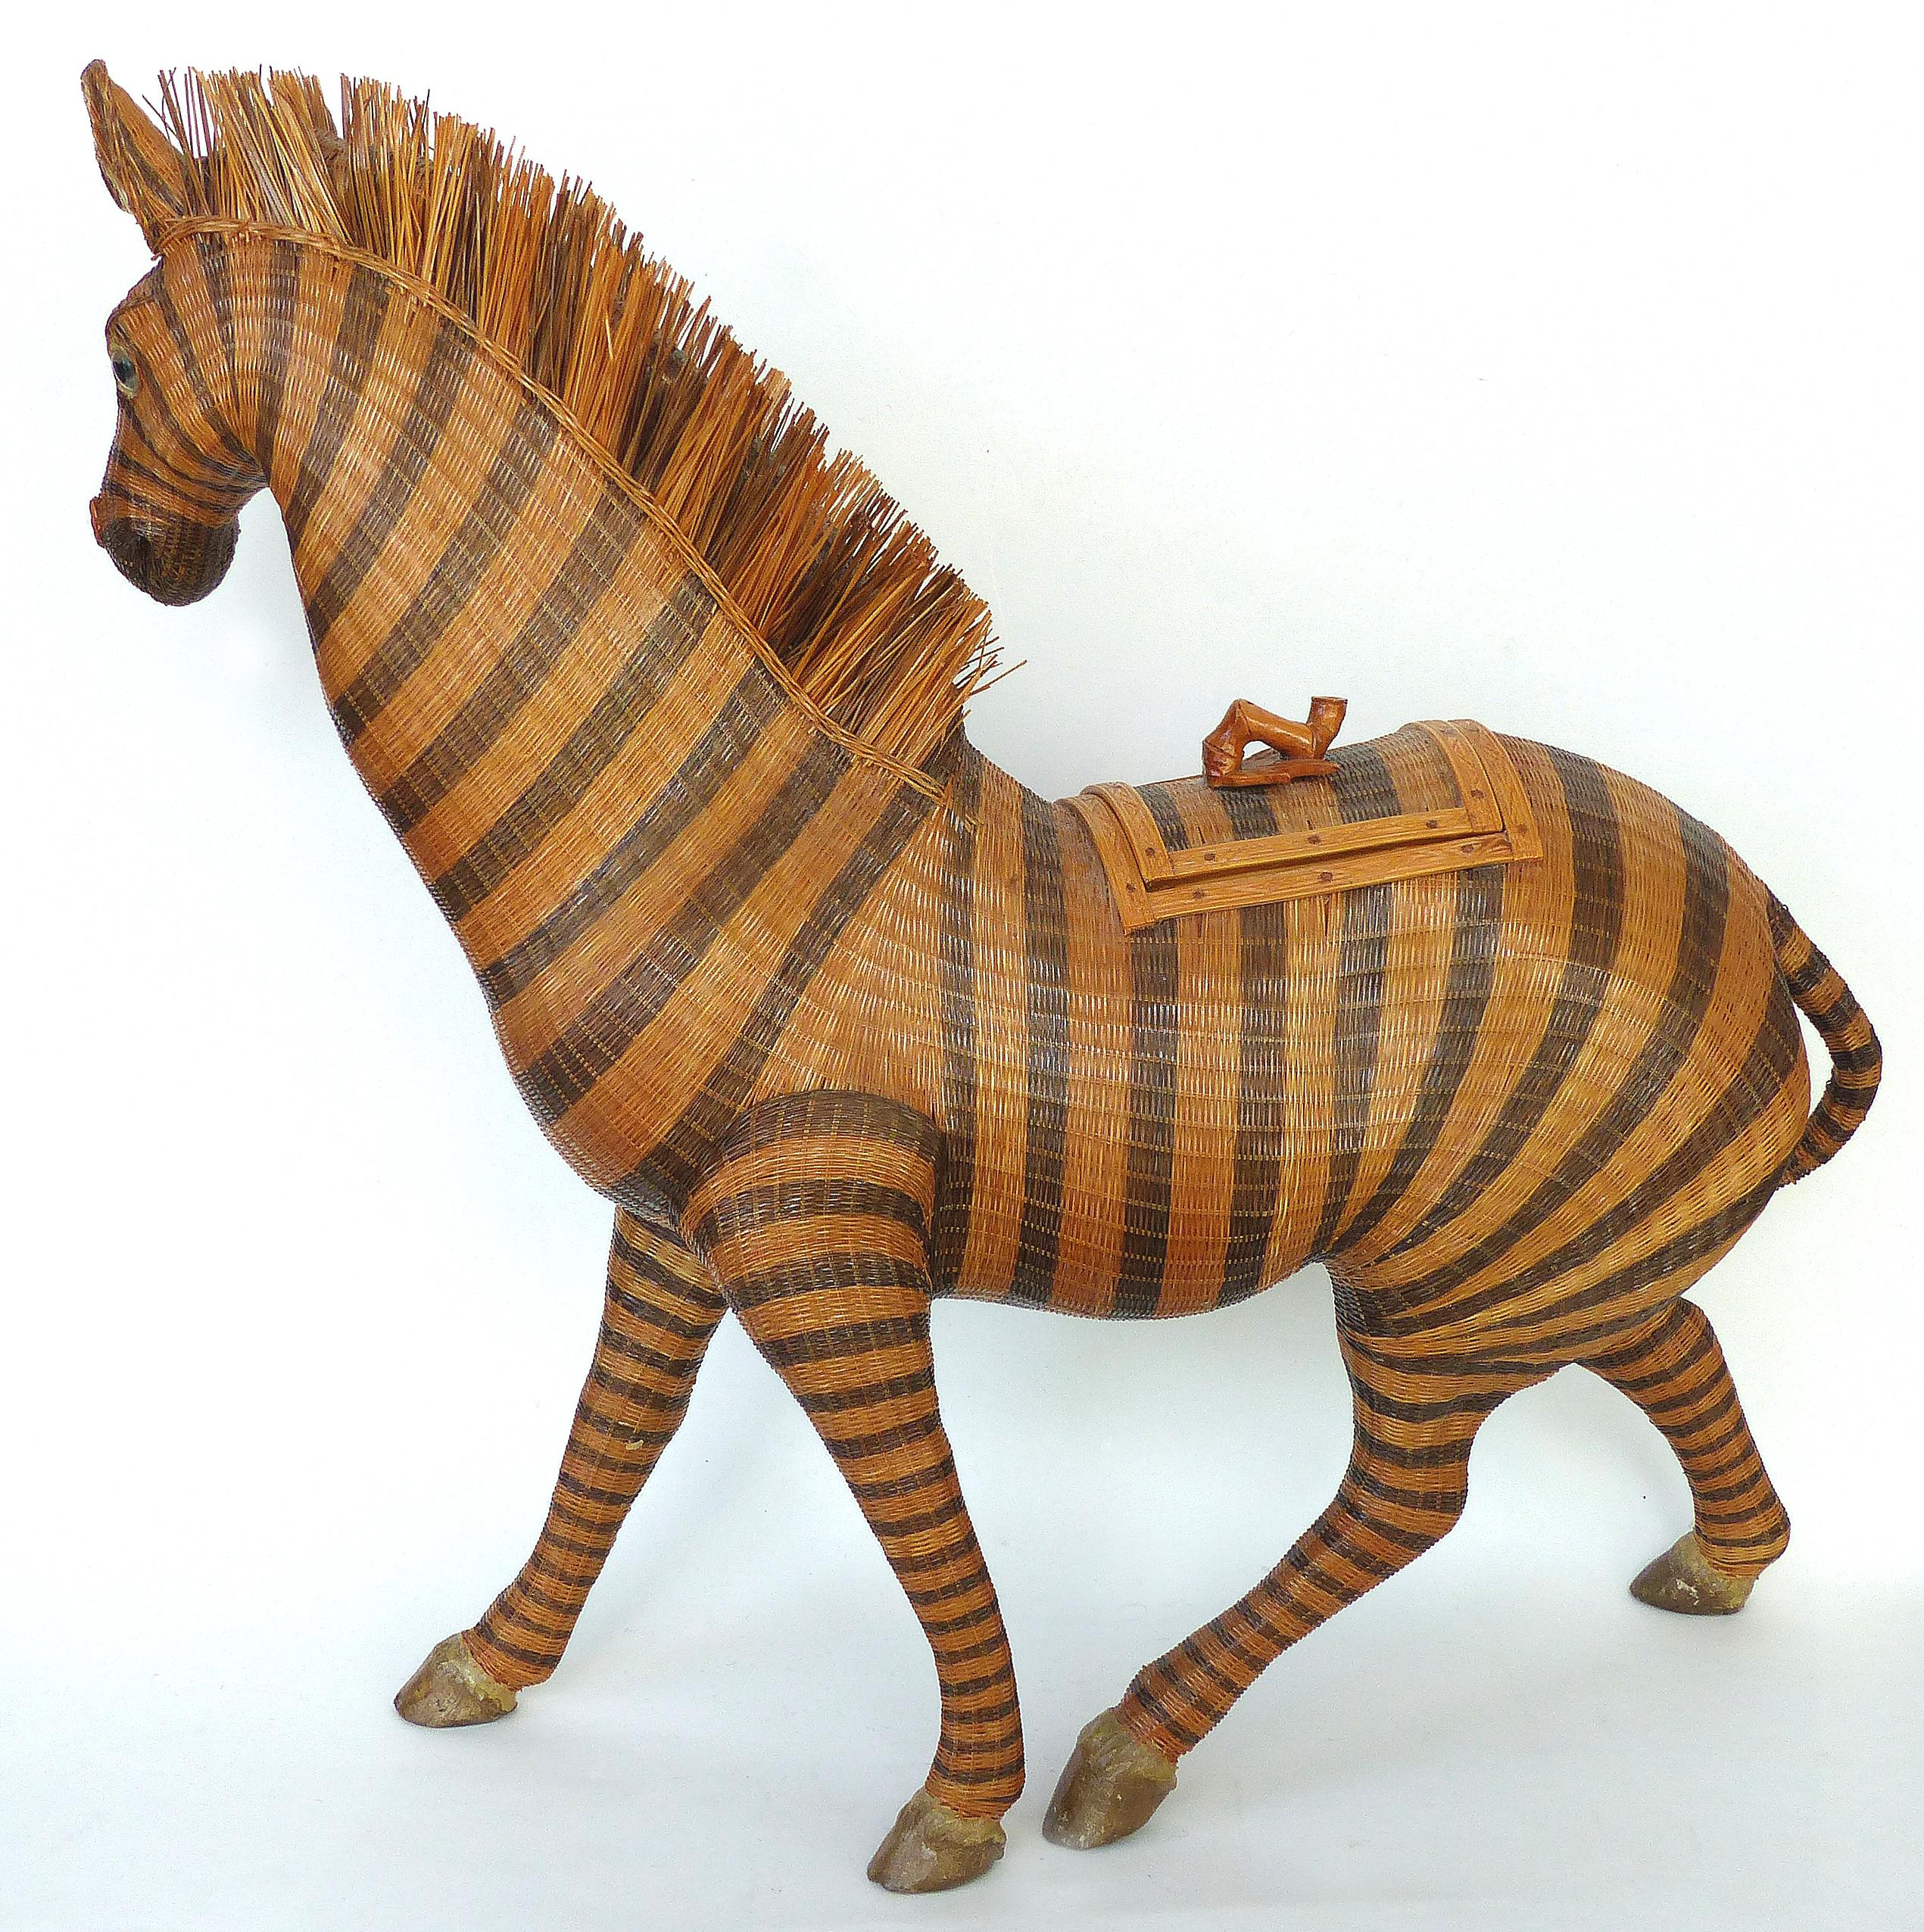 Chinese Woven Reed Zebra Trinket Box

Offered for sale is an intricately woven and finely detailed figure of a zebra from China, circa 1970. The zebra is not only a wonderful decorative object but also serves as a trinket box or basket. There is a